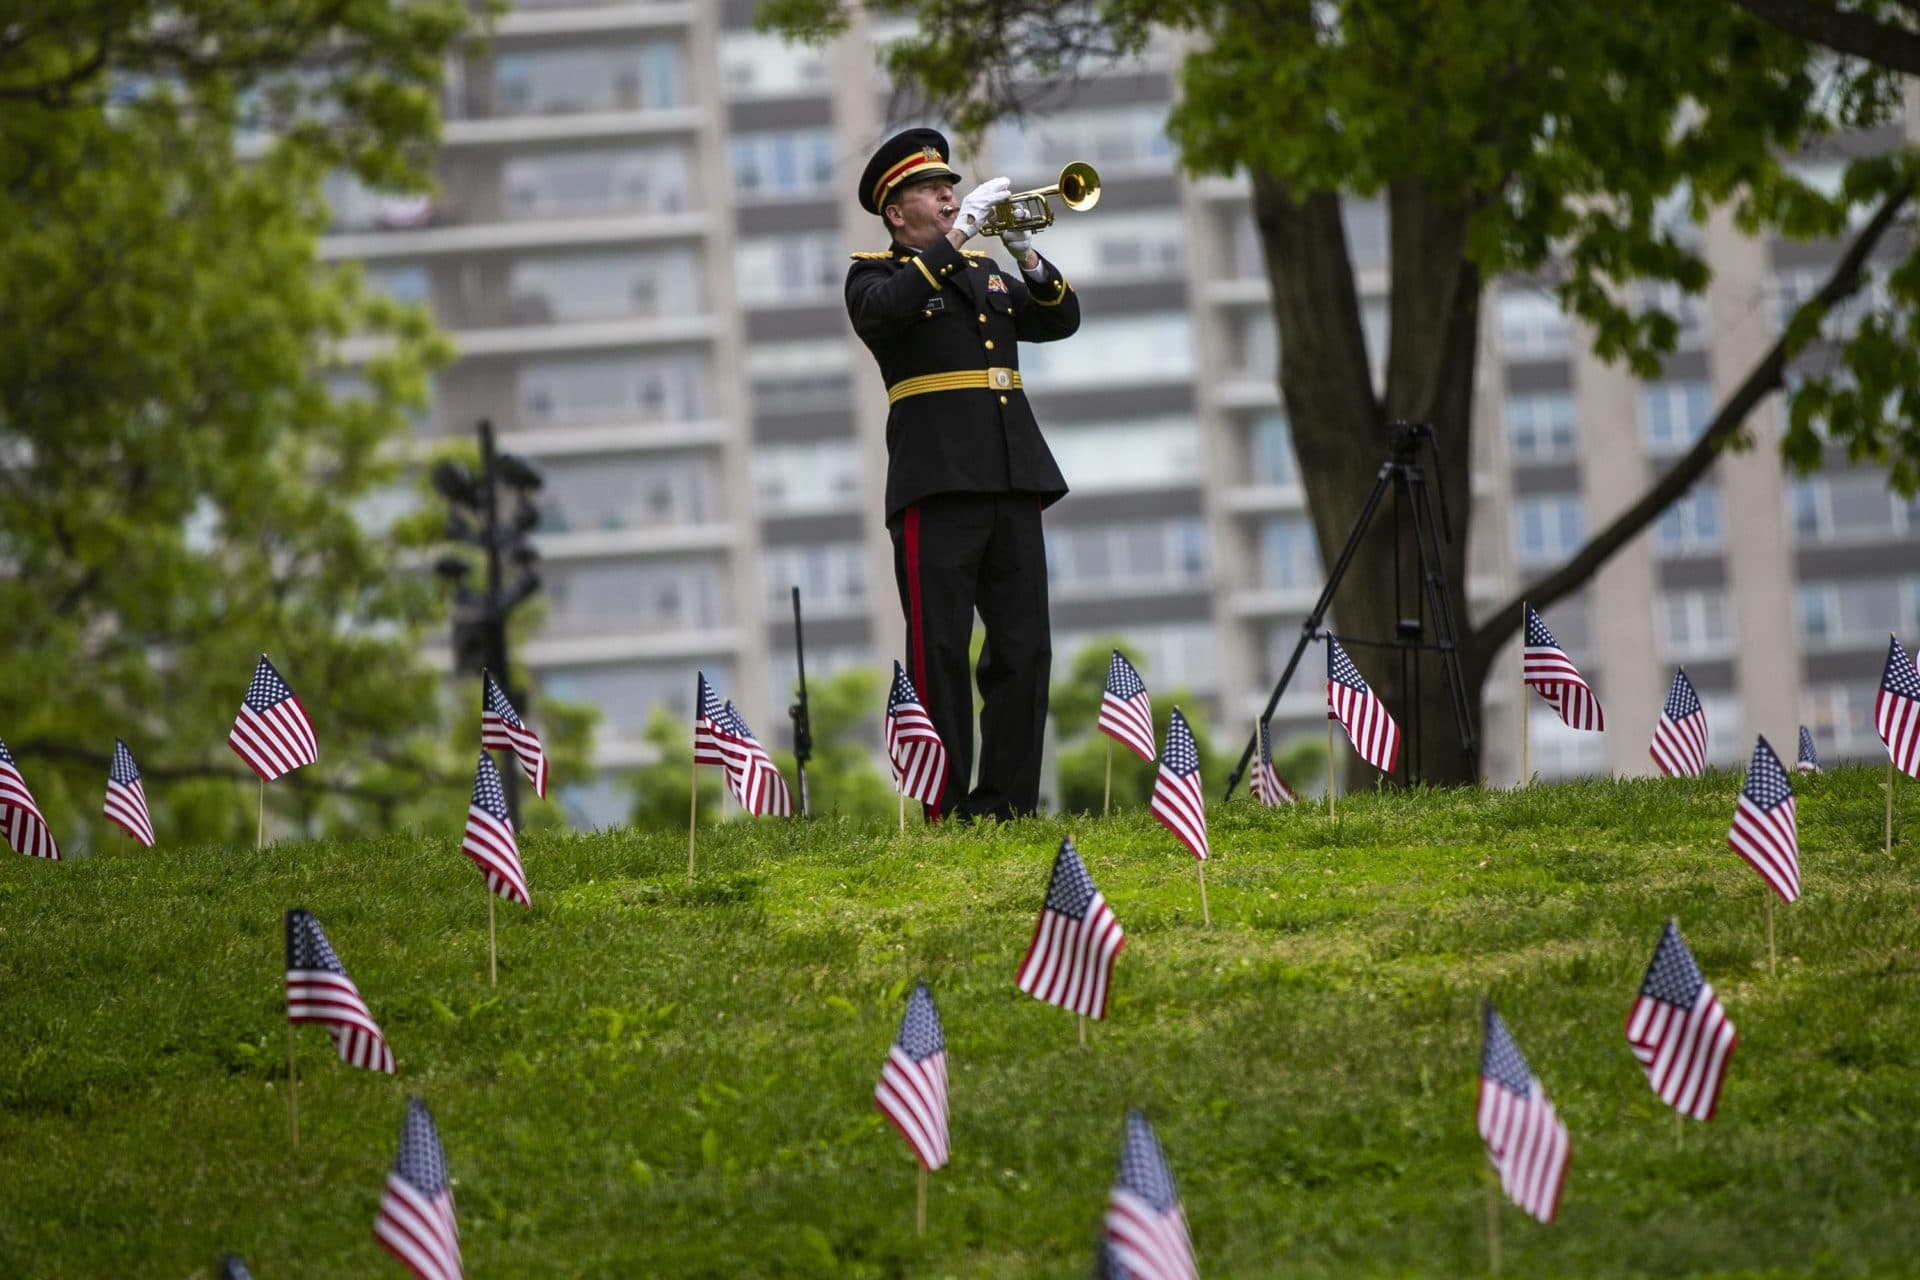 A bugler plays Taps after the wreath is placed at the base of the Soldiers and Sailors Monument. (Jesse Costa/WBUR)